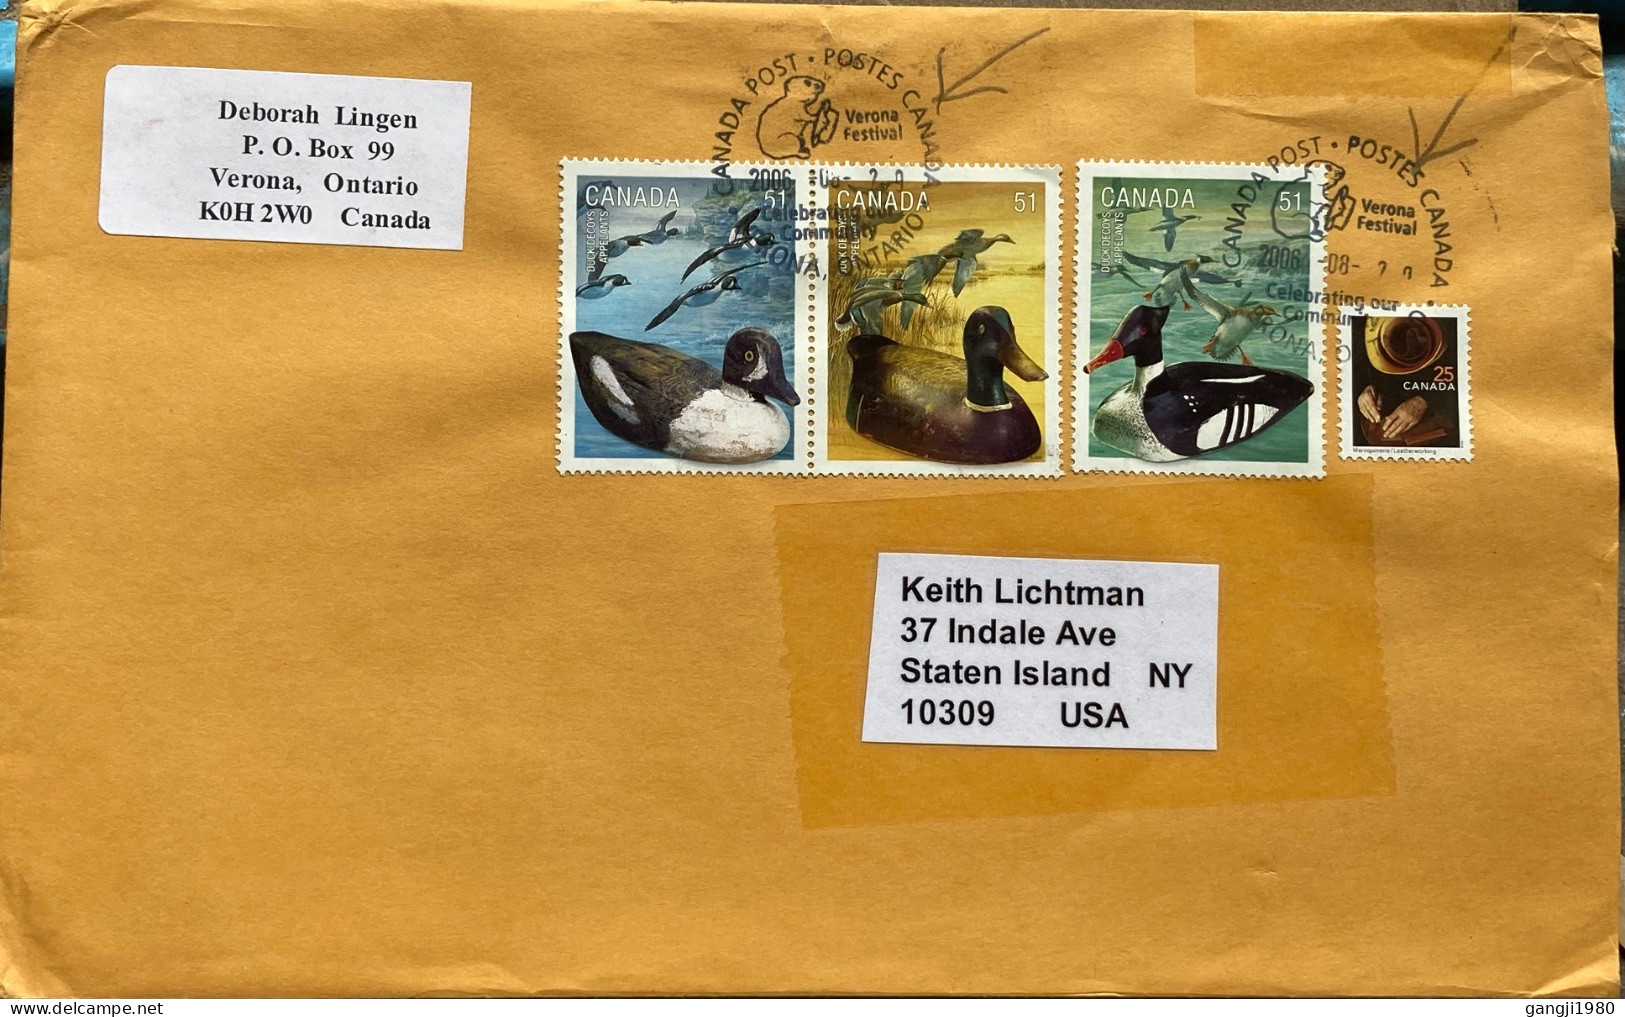 CANADA-2006, COVER USED TO USA, 4 BIRD DUCK STAMP, ANIMAL PICTURE CANCEL, VERON CITY FESTIVAL, CELEBRATING OUR COMMUNITY - Lettres & Documents